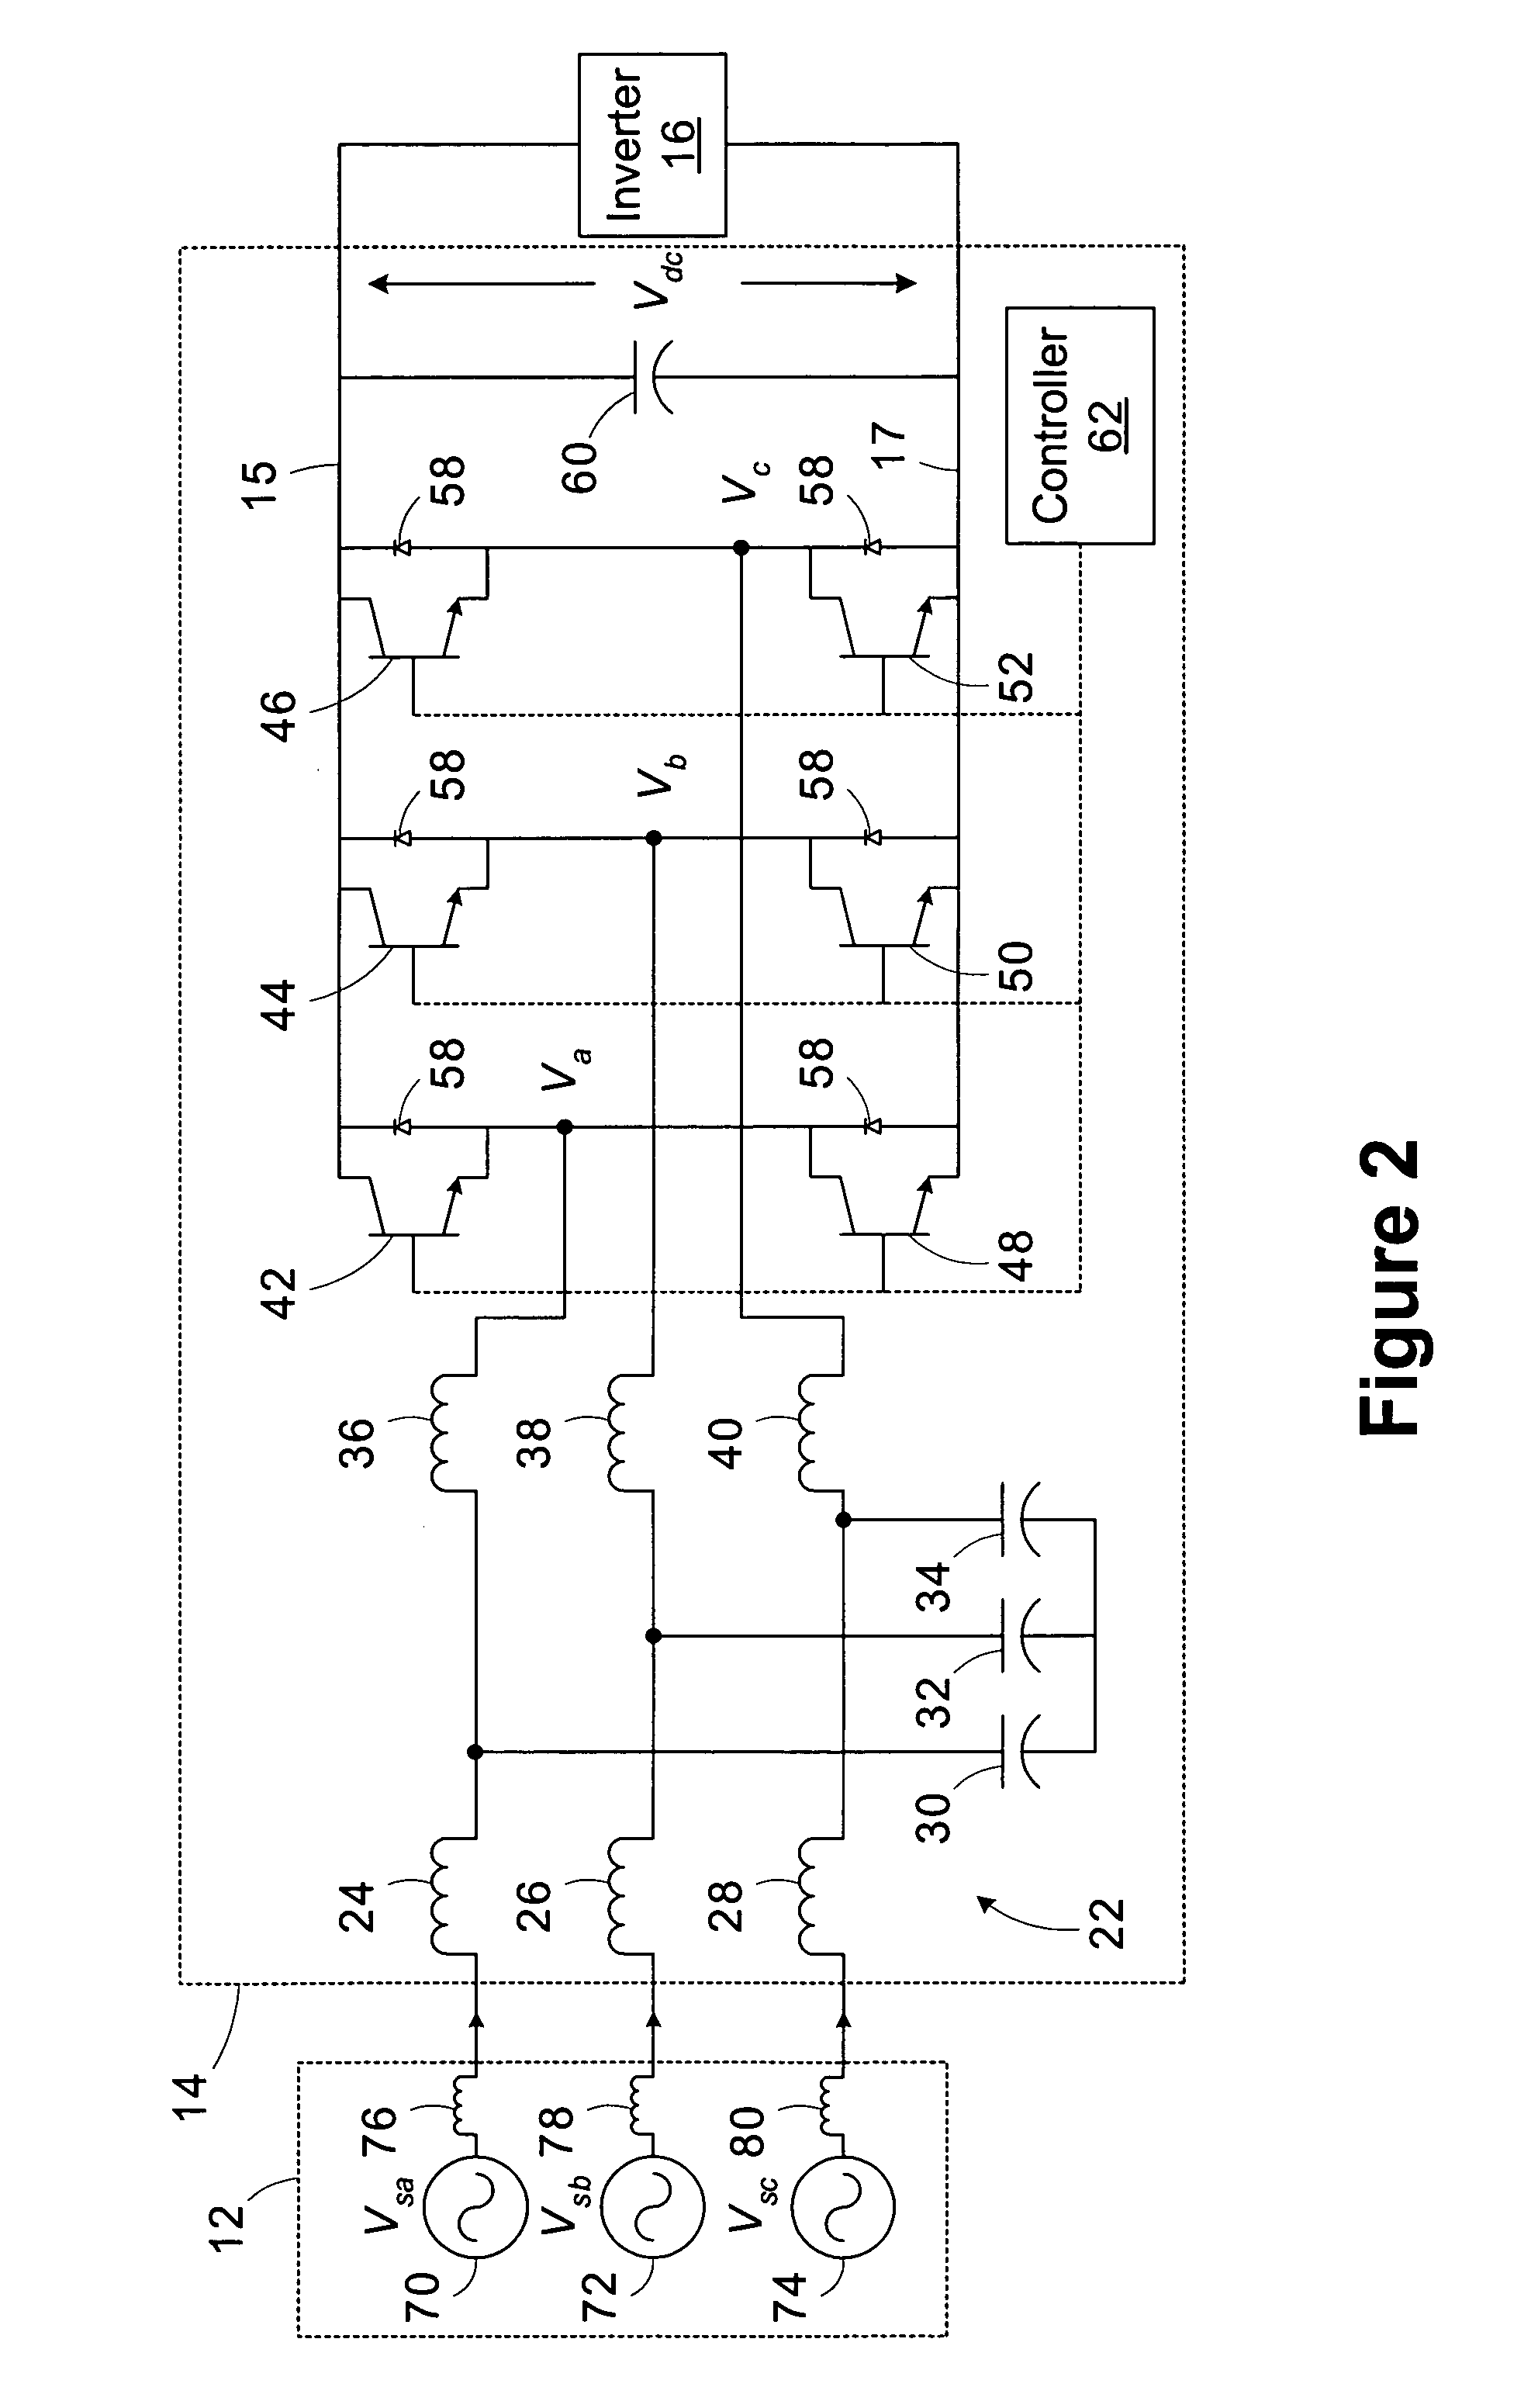 Pulse width modulation (PWM) rectifier with variable switching frequency